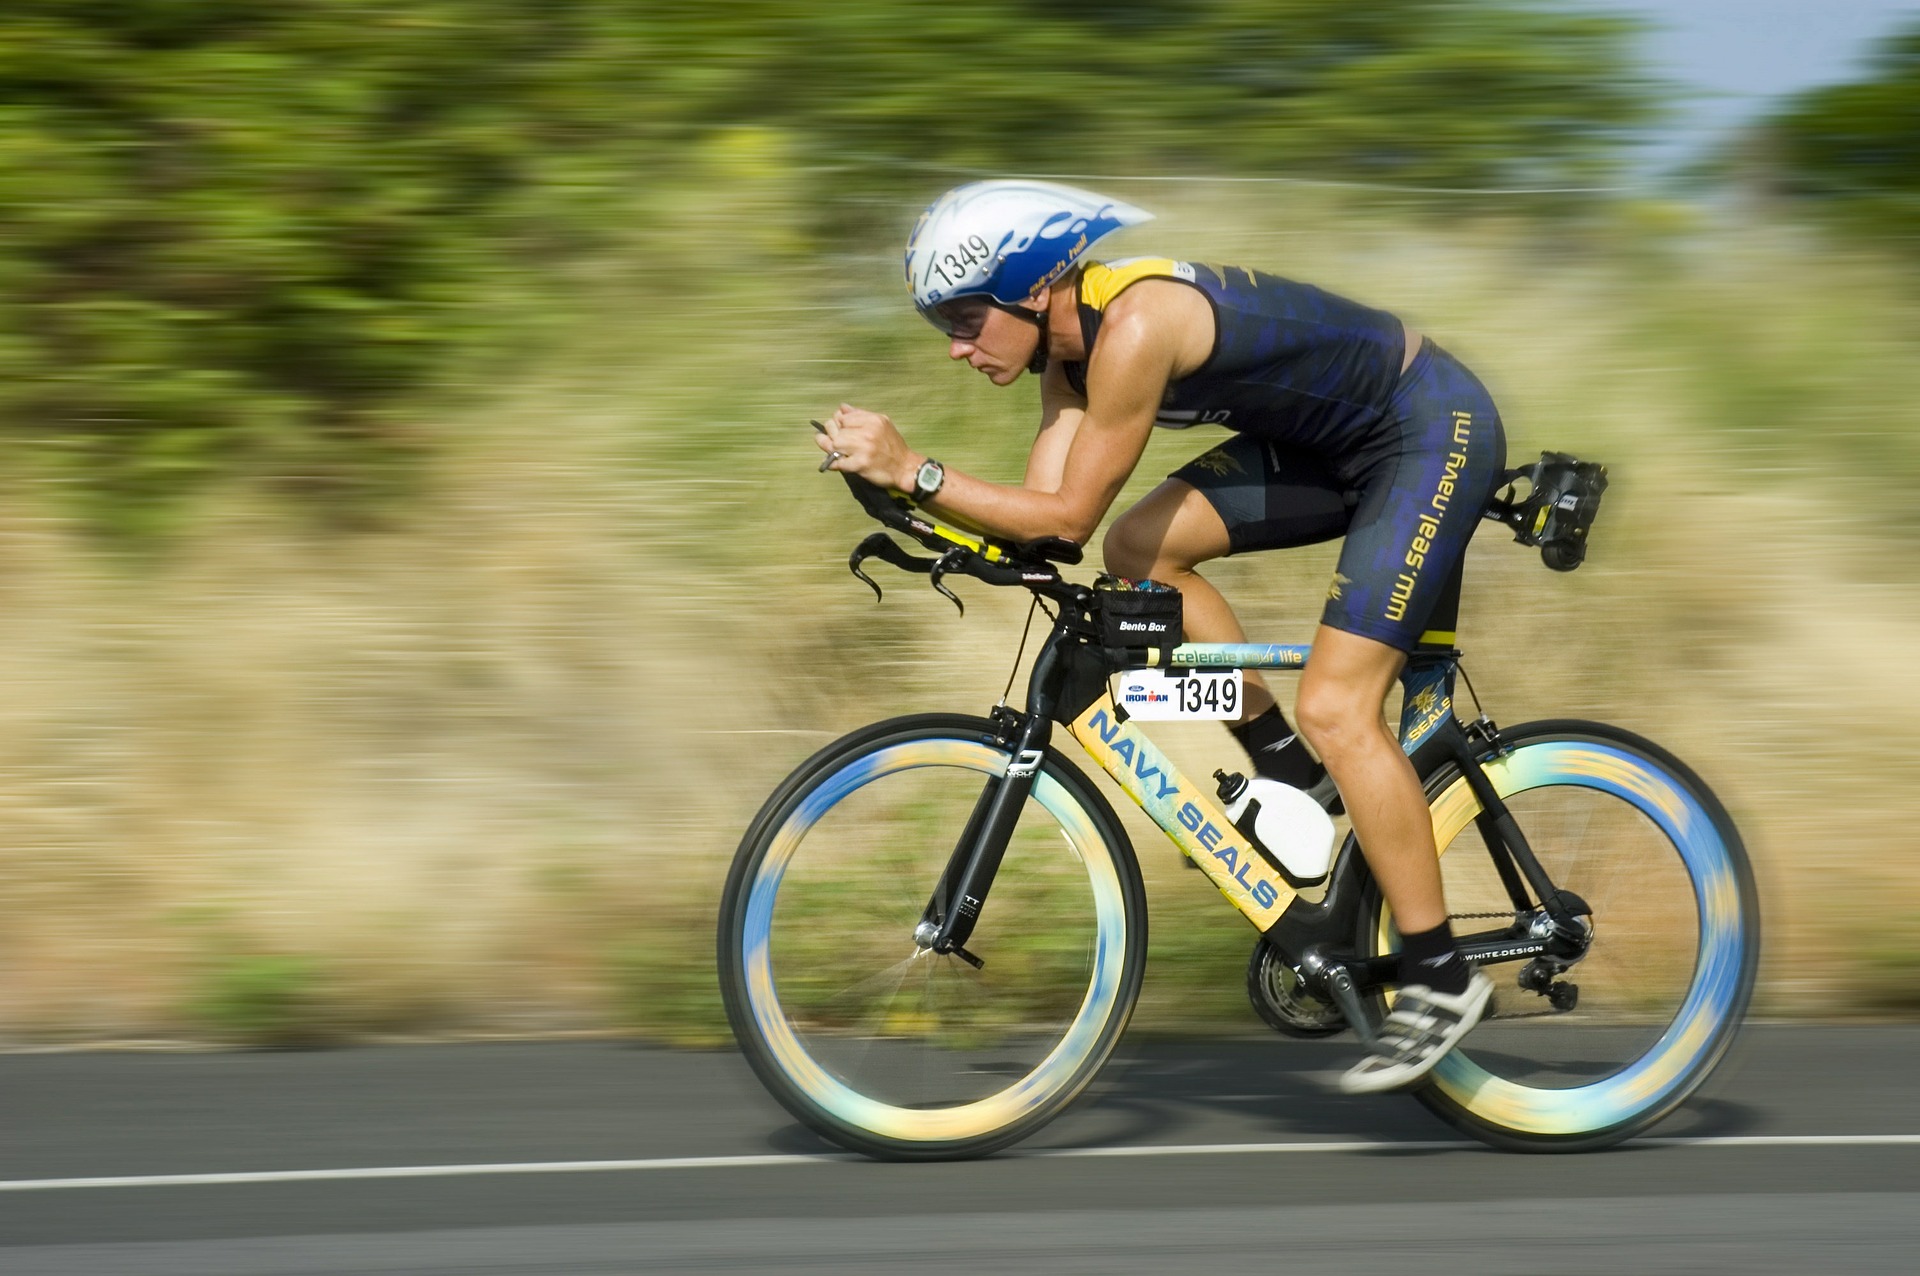 triathalon-cycling-racer-618750_1920